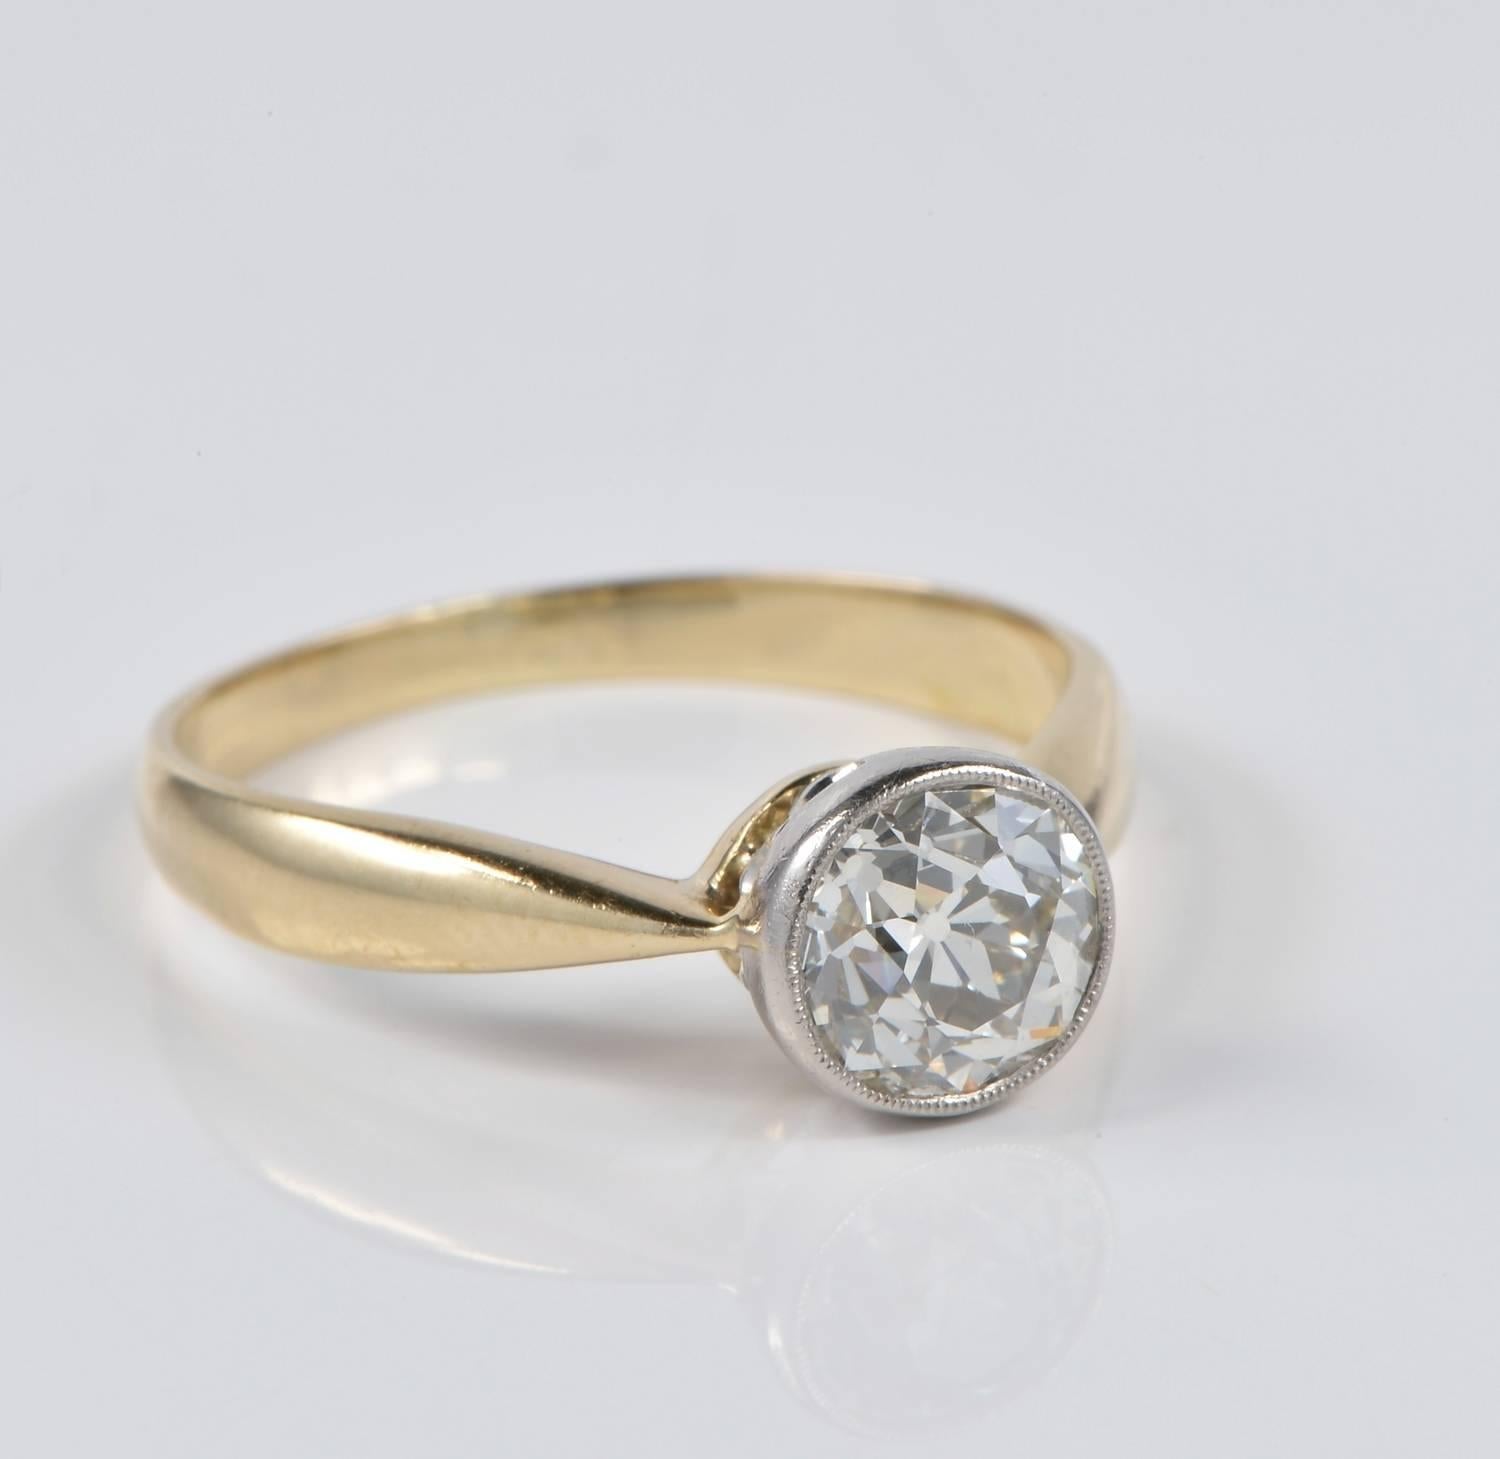 Grace and simplicity are remarked here to express a ring that will last for ever 
14 KT solidly hand crafted during 1900 ca - marked with the top bezel crafted of solid PLATINUM lovely under gallery work and millpoint finishing around the rub over